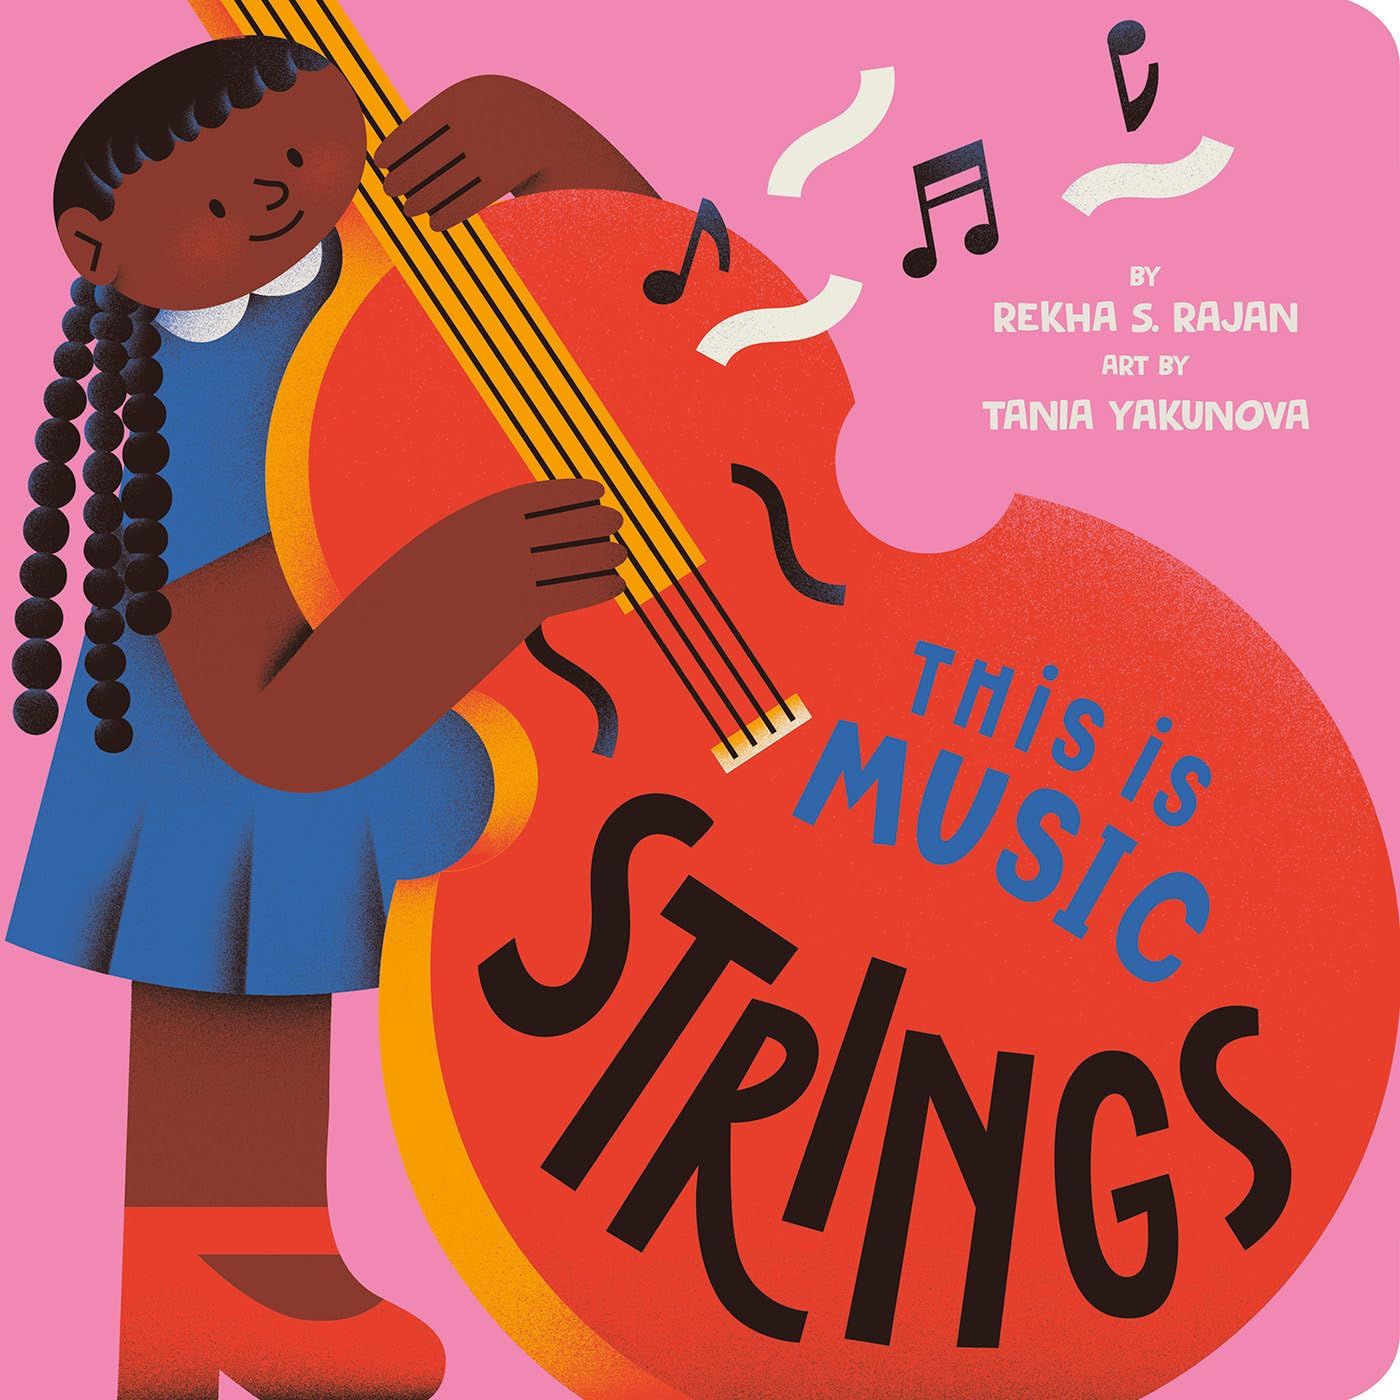 Cover of This Is Music: Strings by Rekha S. Rajan, illustrated by Tania Yakunova